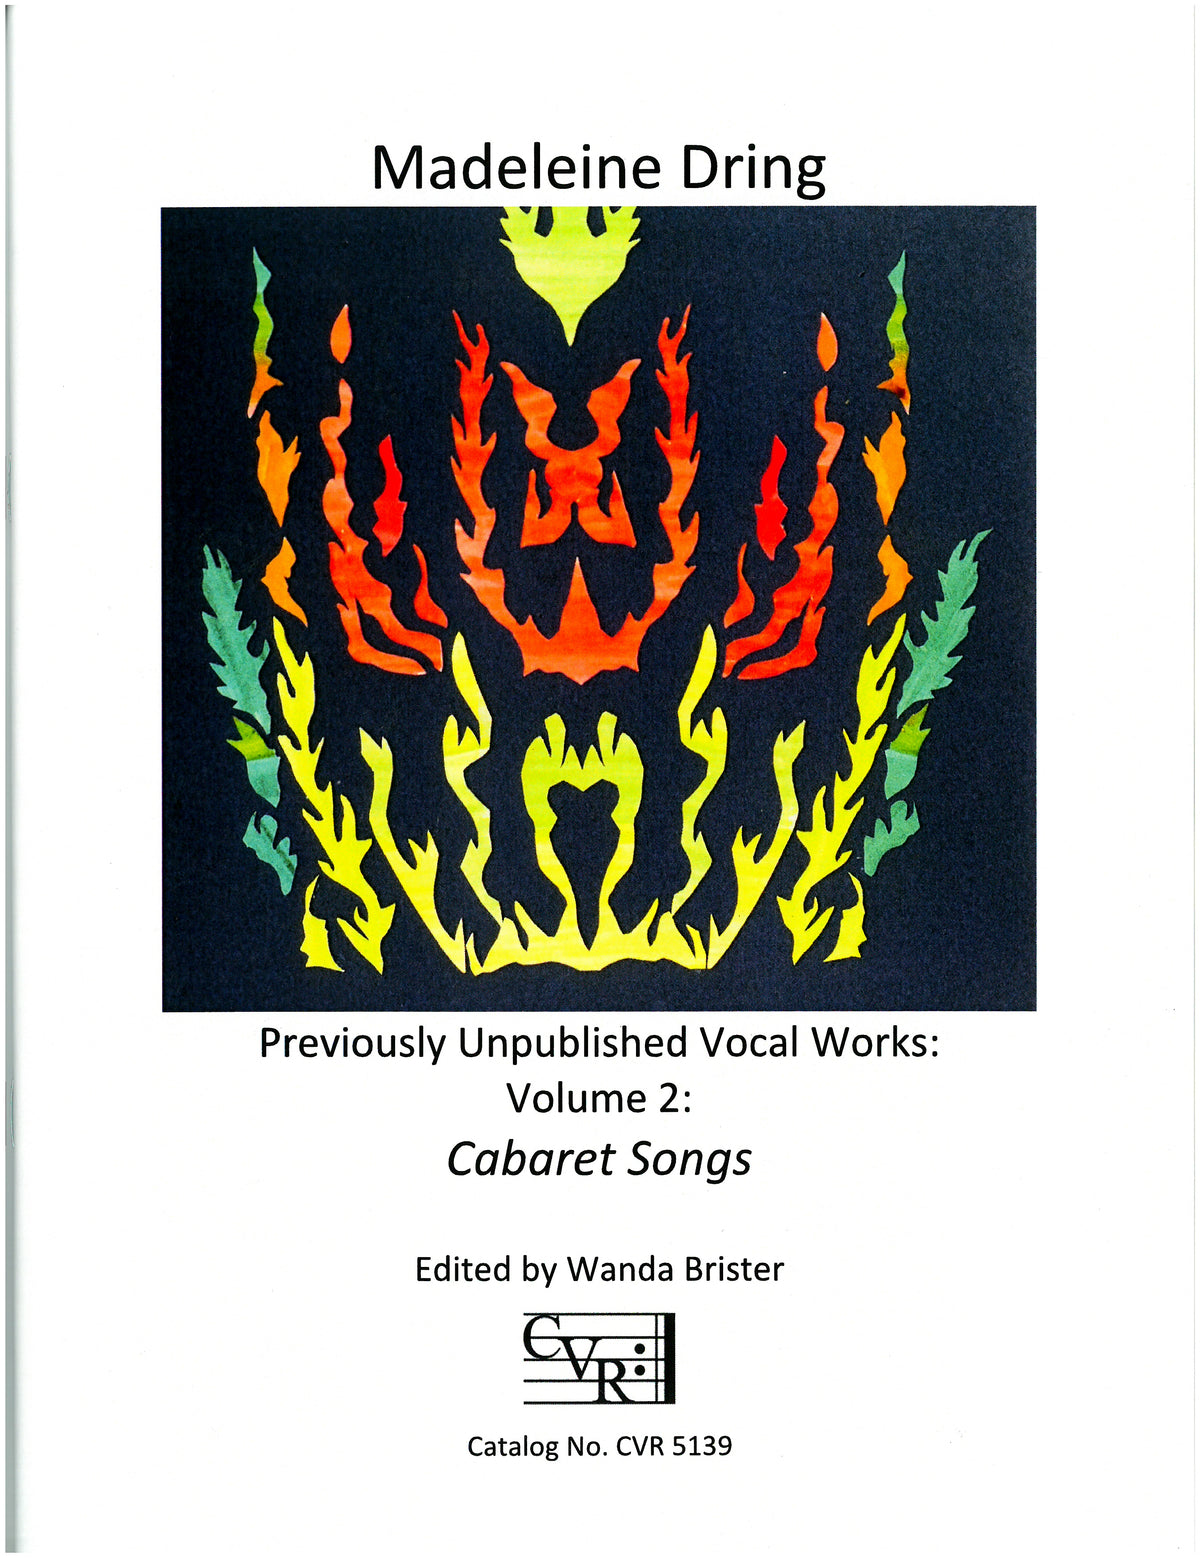 Dring Cabaret Songs - Volume 2 of Previously Unpublished Vocal Works